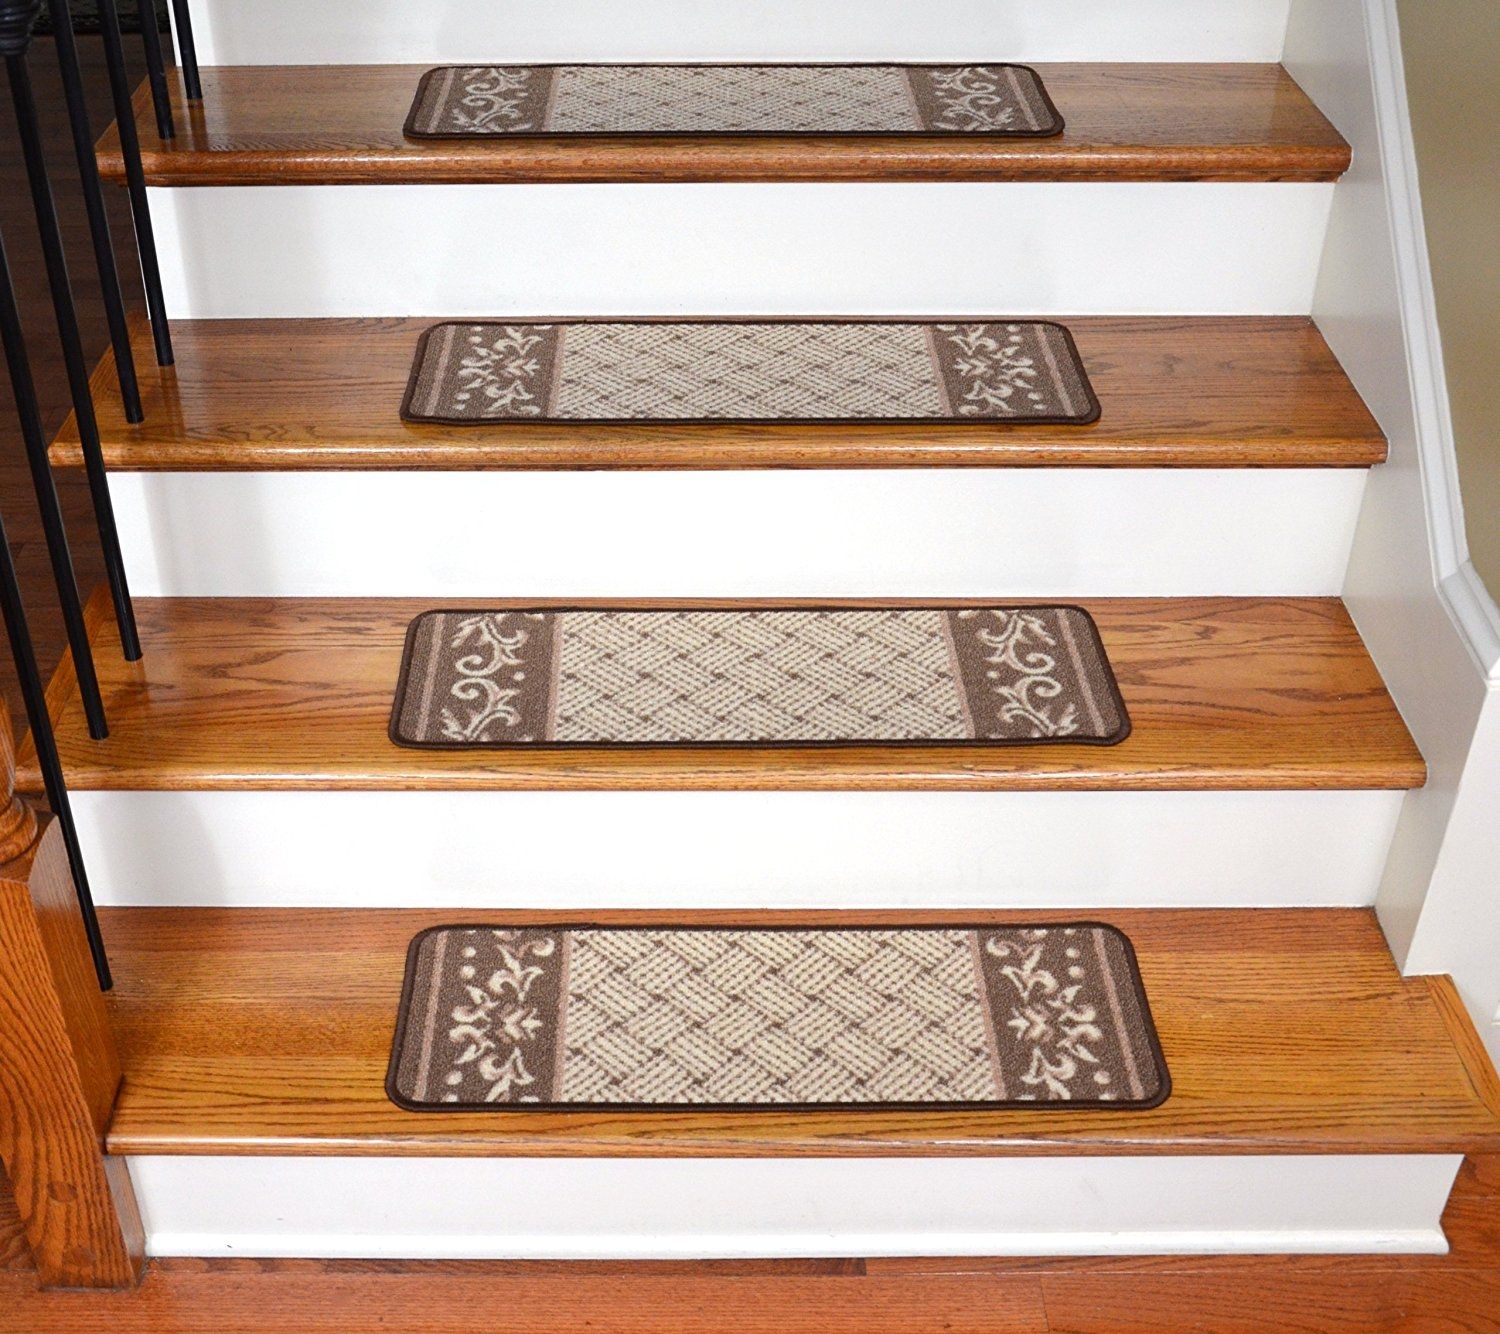 Amazon Carpet Stair Treads Caramel Scroll Border Pertaining To Stairway Carpet Treads (View 4 of 20)